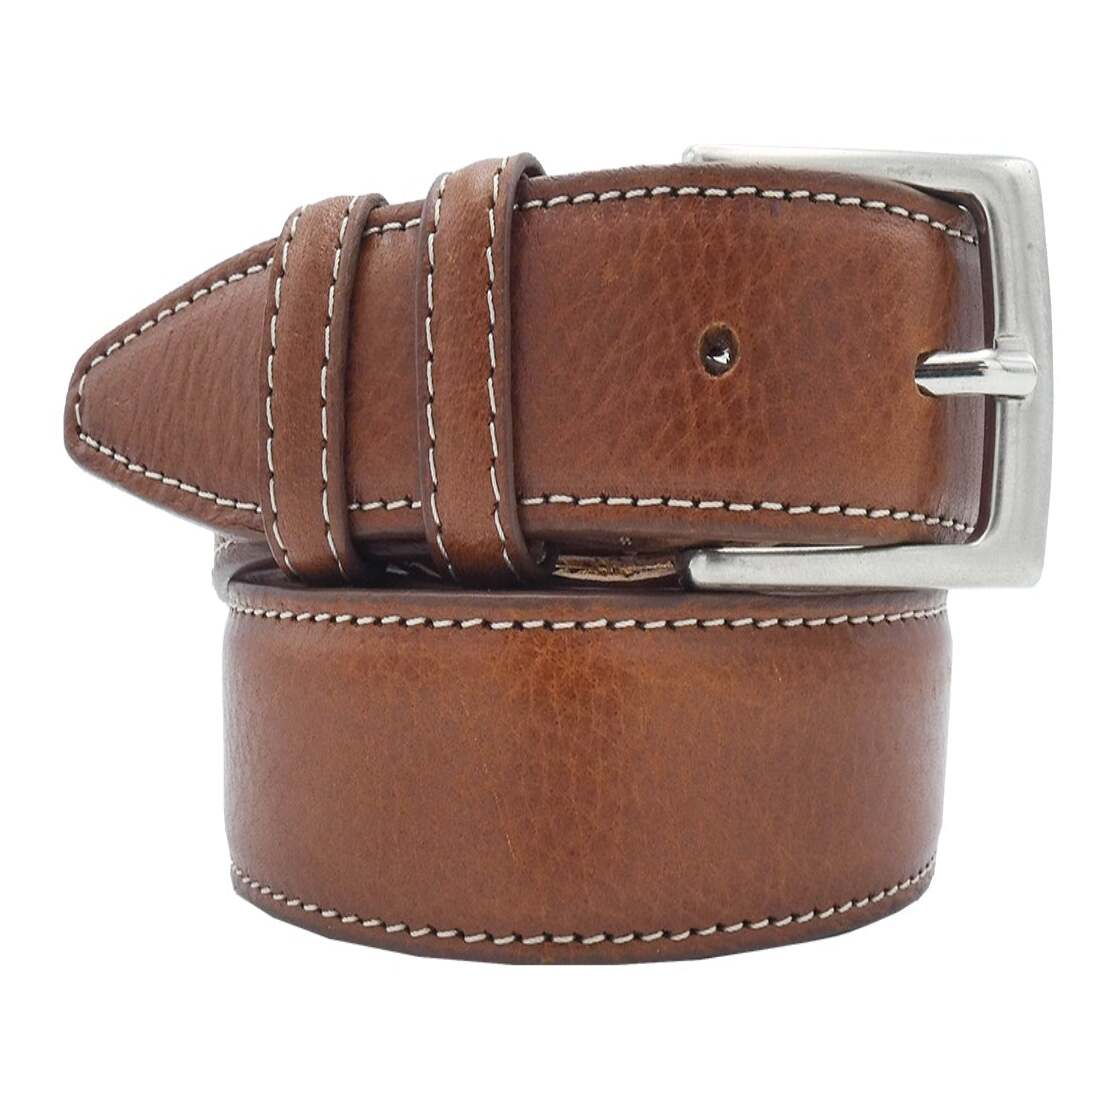 Double rounded leather belt with handcrafted satin zamak buckle - Turin